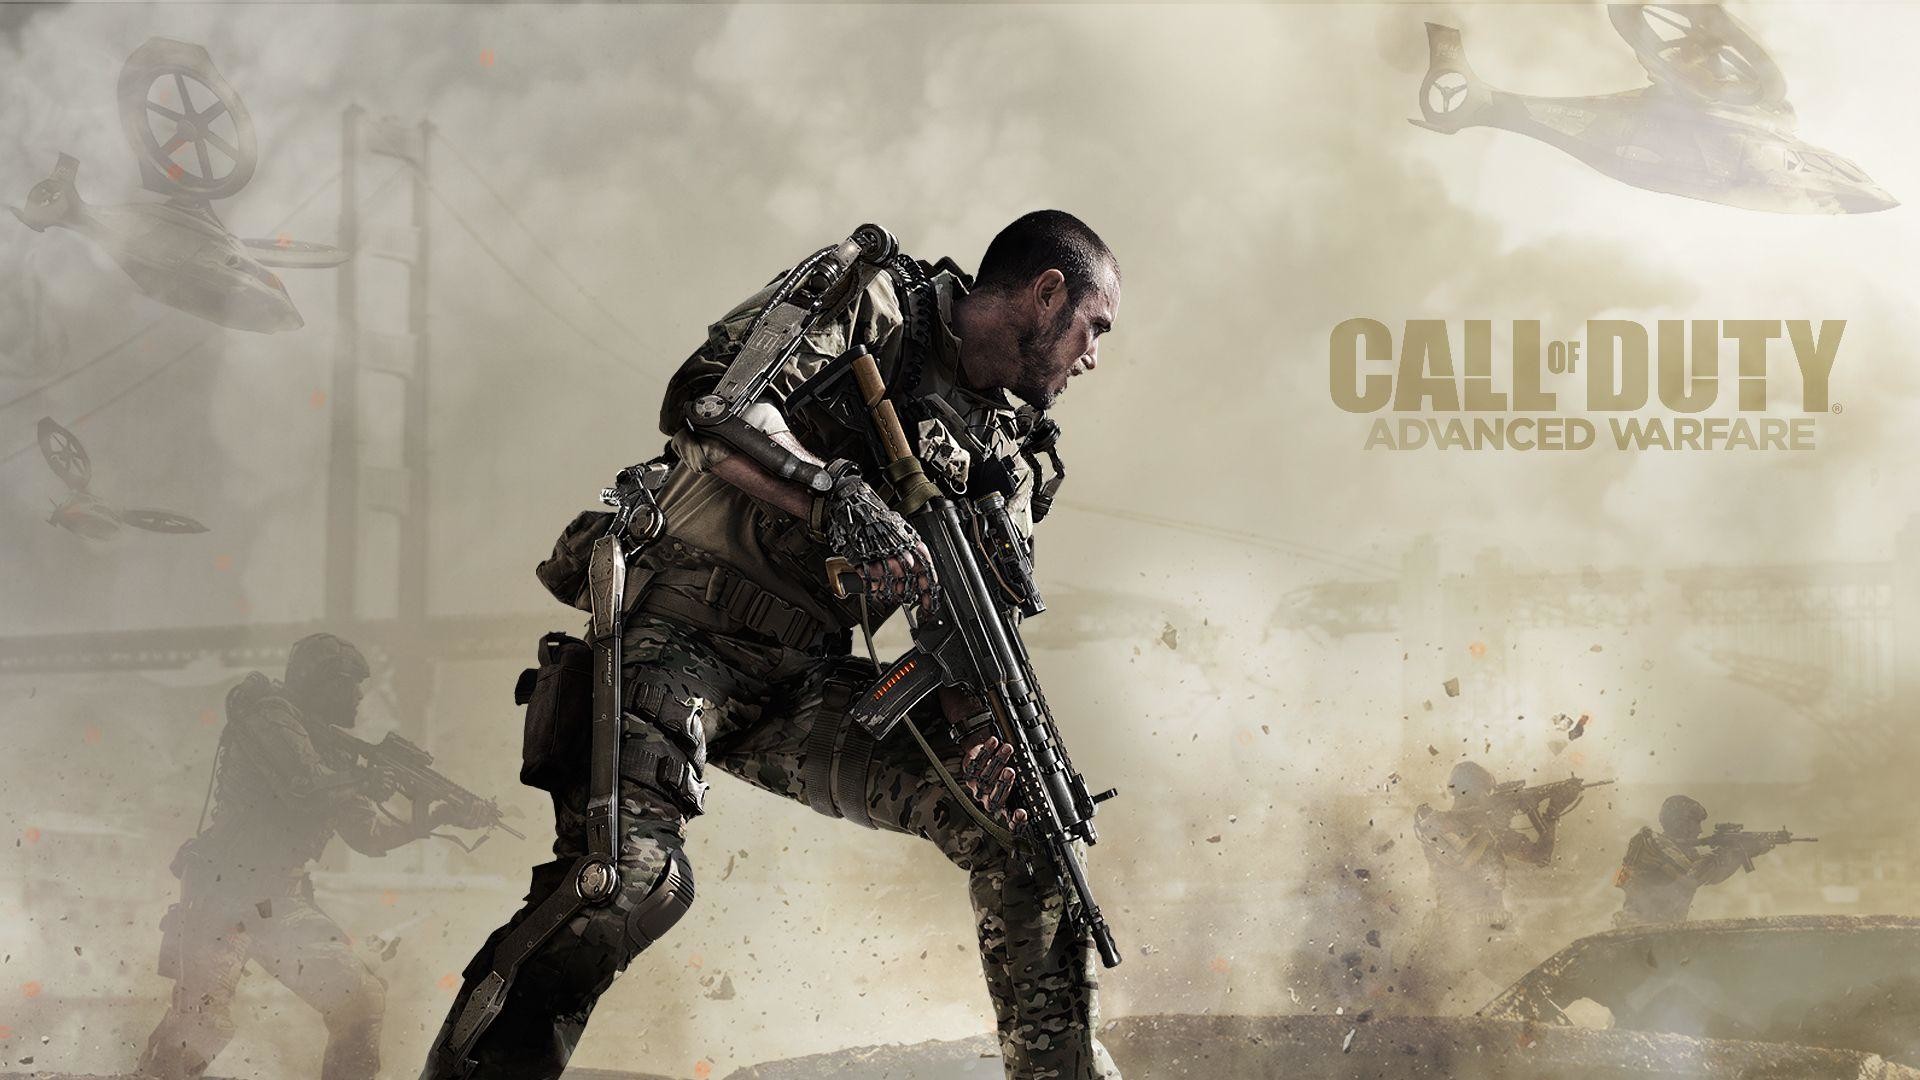 1920x1080 Call of Duty Advanced Warfare Wallpaper FREE Download - Unofficial .